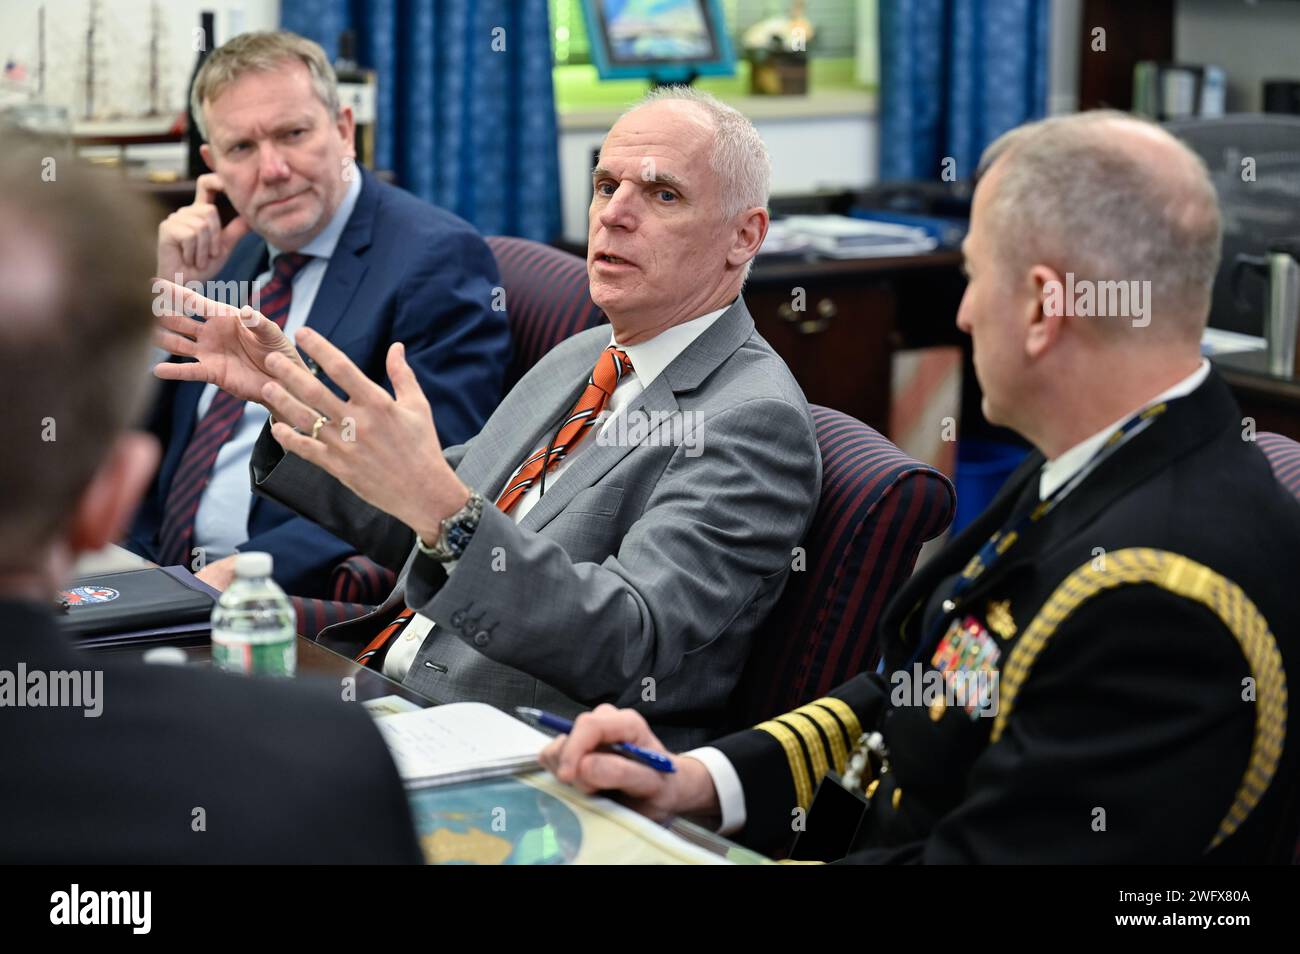 Thomas Lawhead, assistant deputy chief of staff of the Air Force for strategy, integration and requirements, speaks with Iceland Chief of Defence Jónas Allansson during a meeting at the Pentagon, Arlington, Va., Jan. 22, 2024. This image has been altered to obscure security badges. Stock Photo